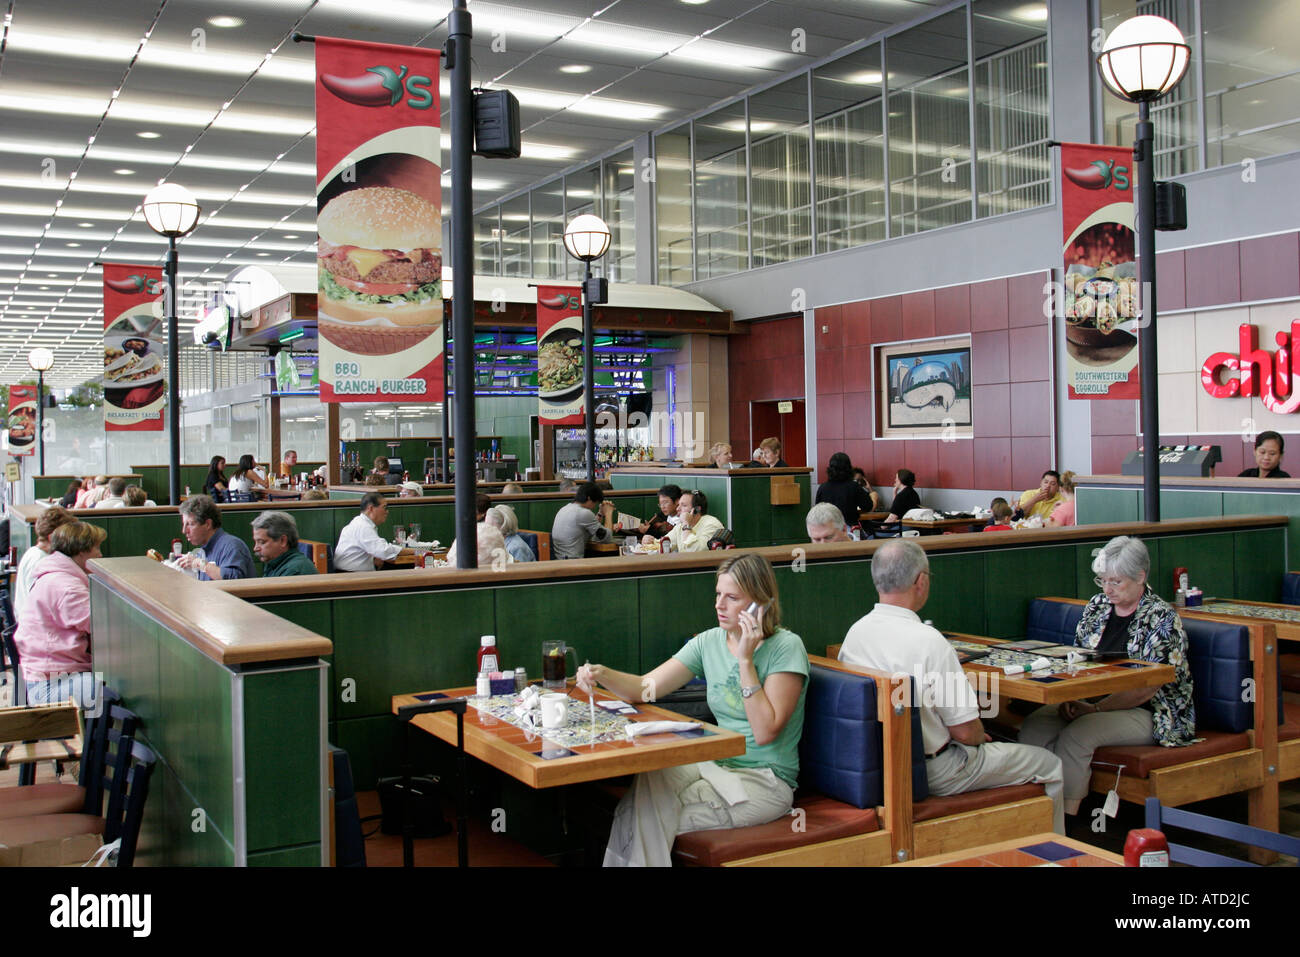 Illinois Cook County,Chicago,O'Hare Airport,Chili's,restaurant restaurants food dining cafe cafes,passengers between flights,eat,food,IL060930012 Stock Photo